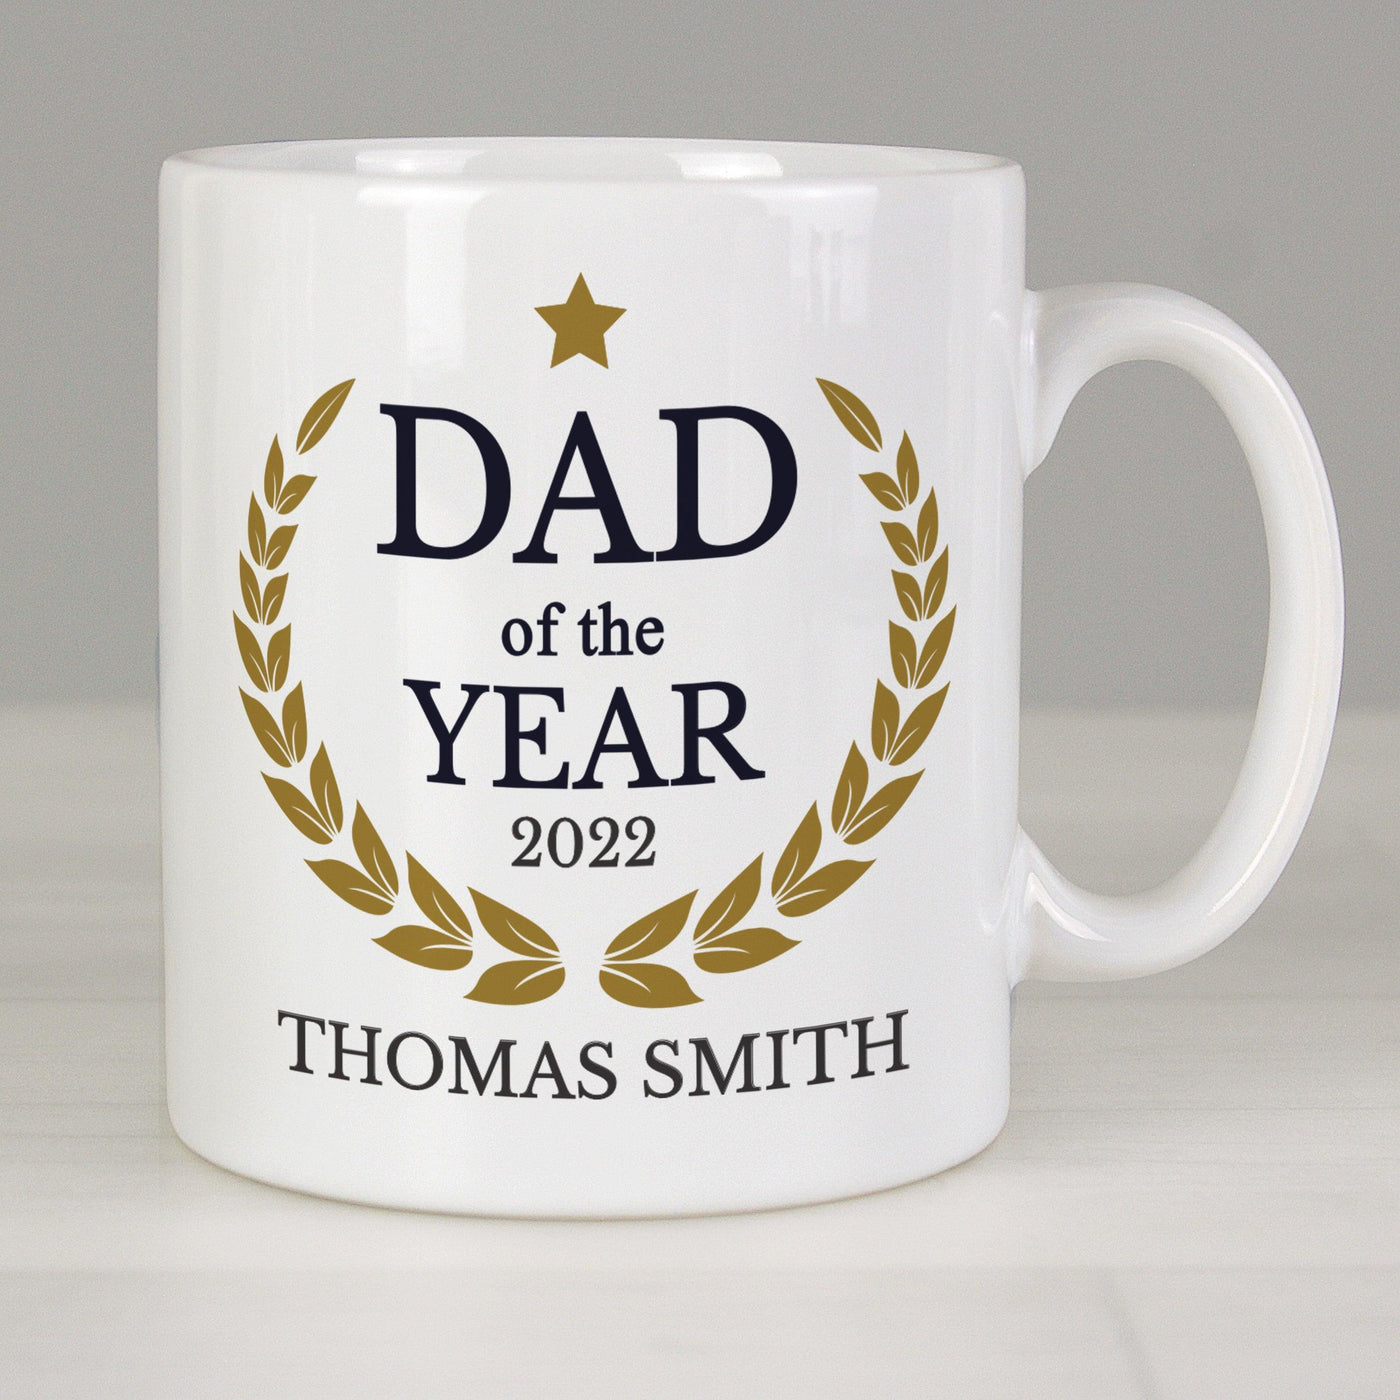 Personalised Dad of the Year Ceramic Mug - Shop Personalised Gifts